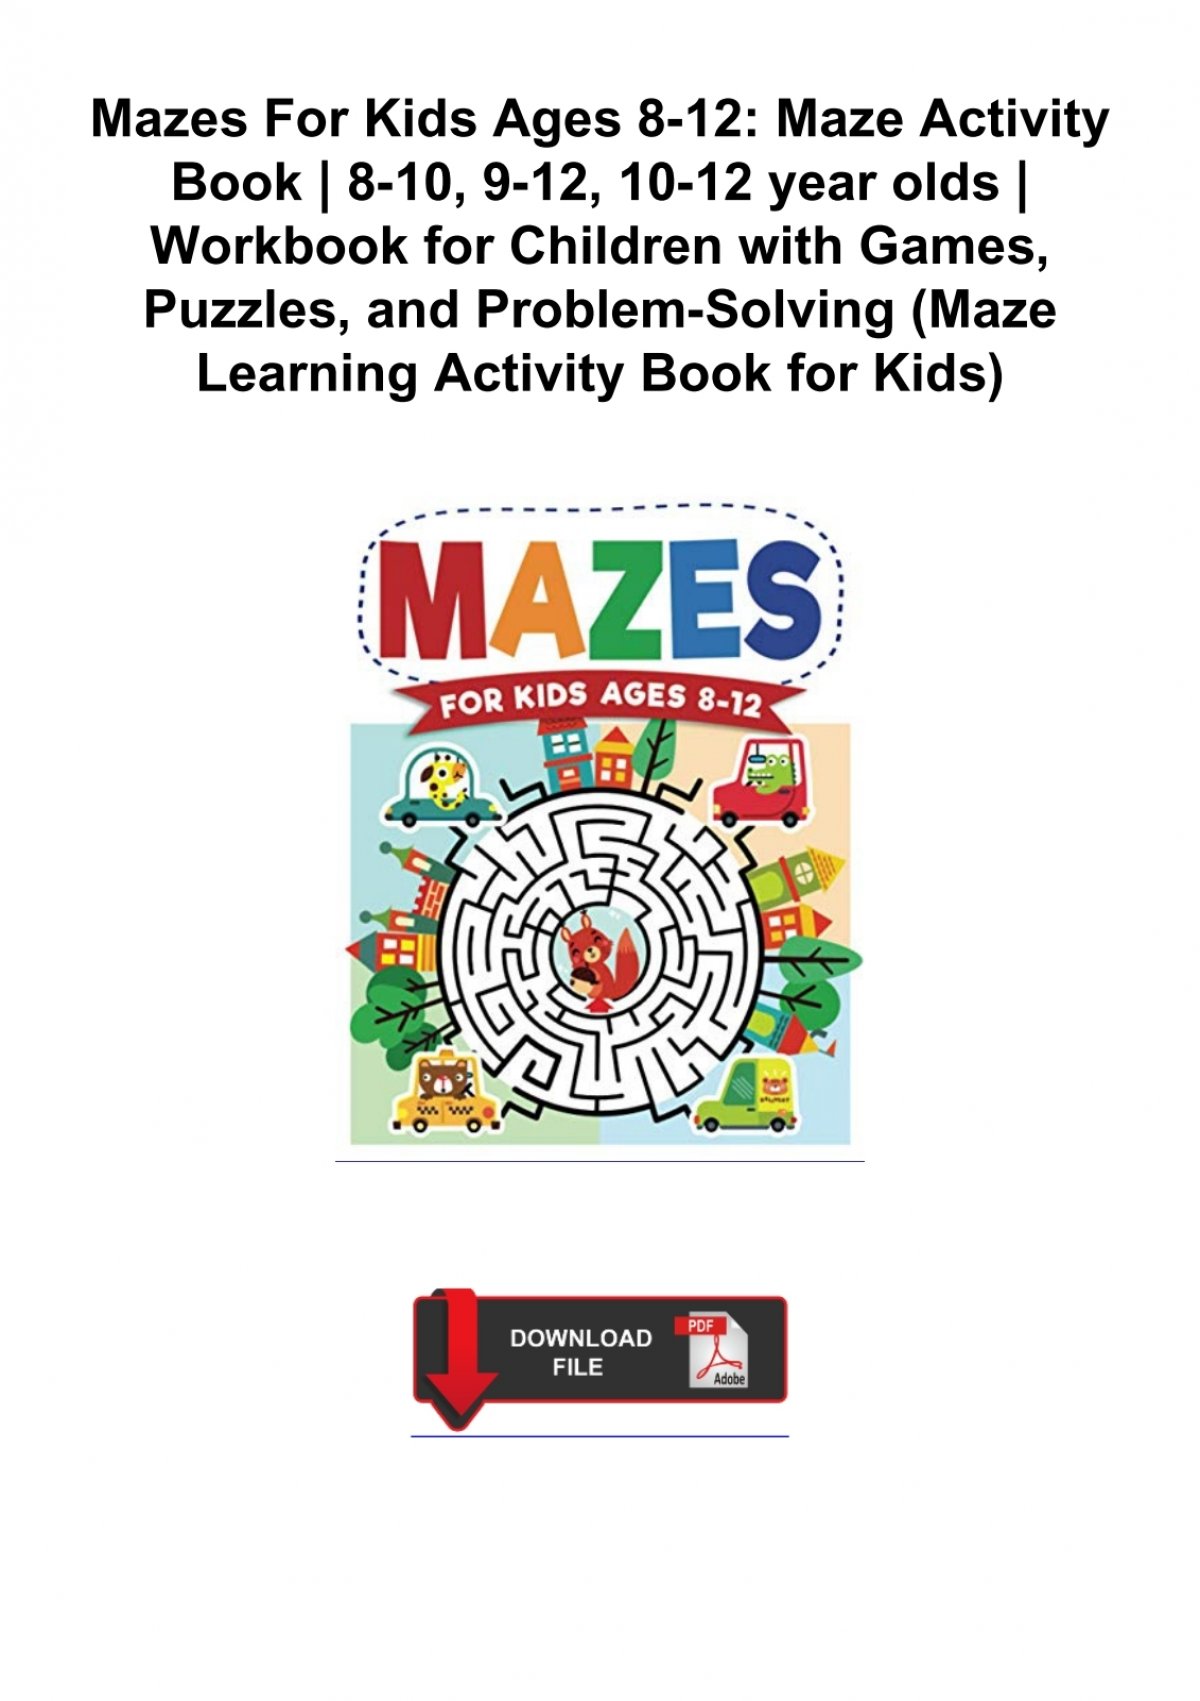 Mazes For Kids Ages 8-12: Maze Activity Book 8-10, 9-12, 10-12 year olds  Workbook for Children with Games, Puzzles, and Problem-Solving (Maze Le  (Paperback)